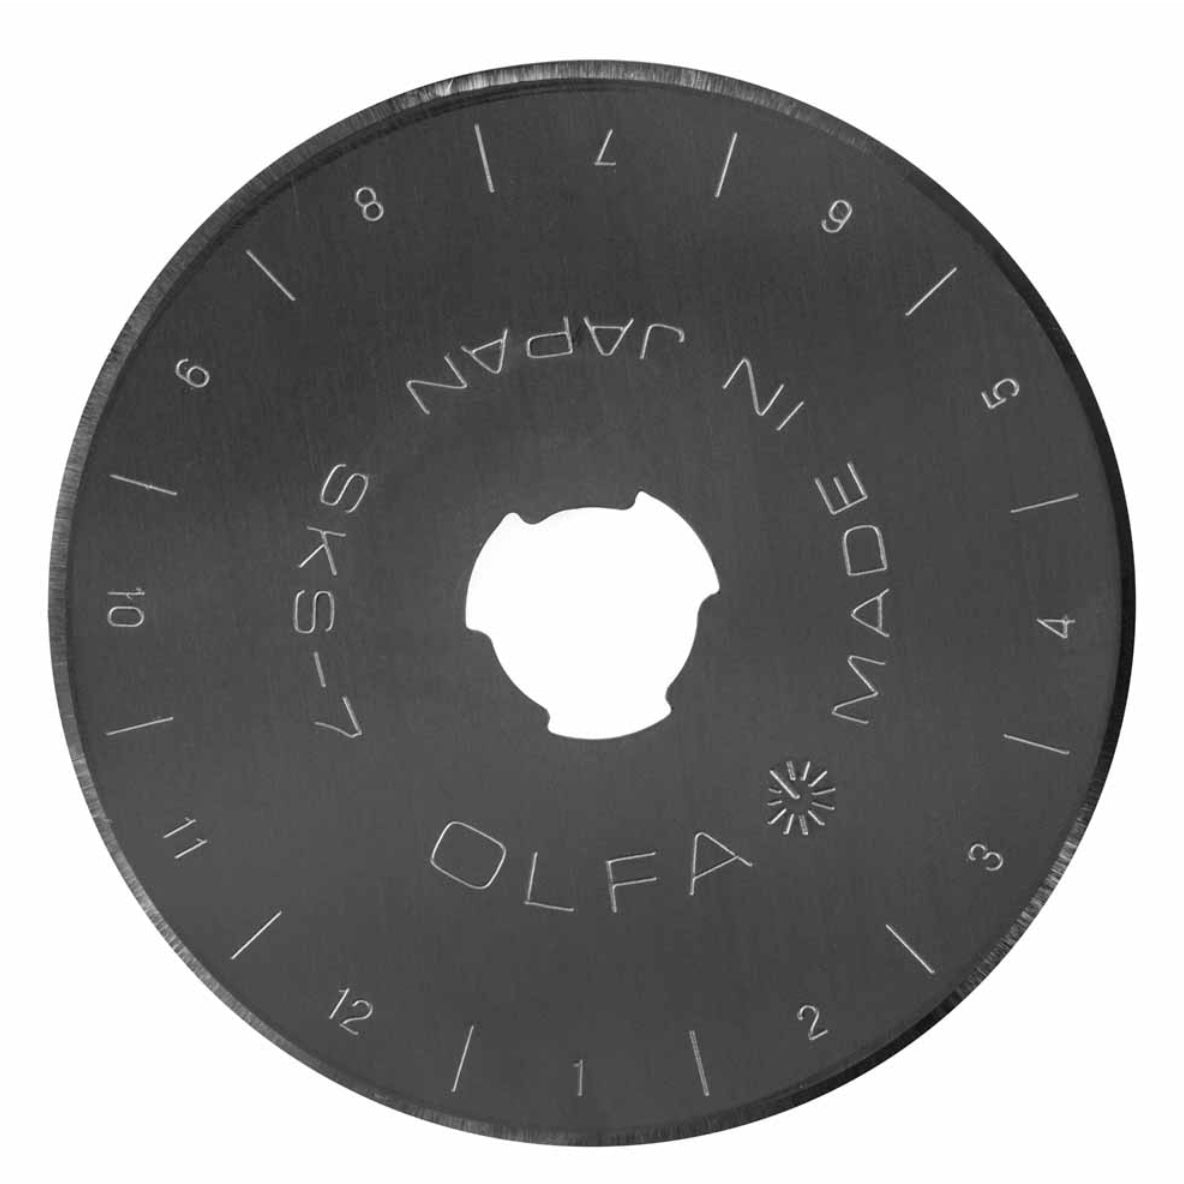 Tungsten Tool Steel Rotary Blade - 45mm - 10pc